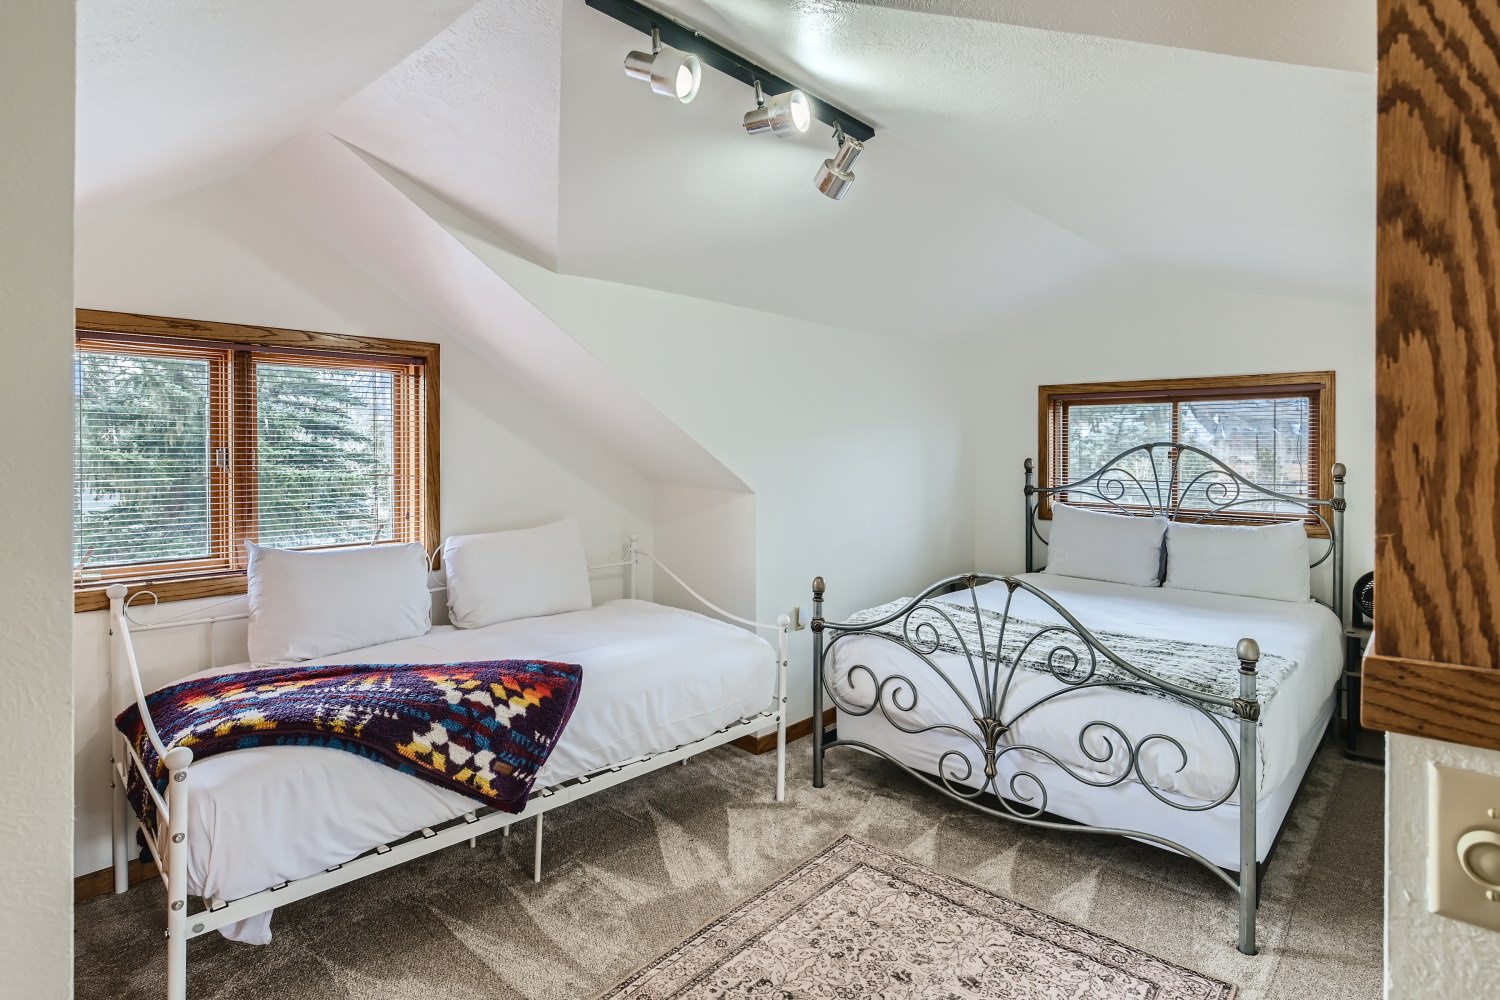 Second Floor Loft with Queen and Twin Bed